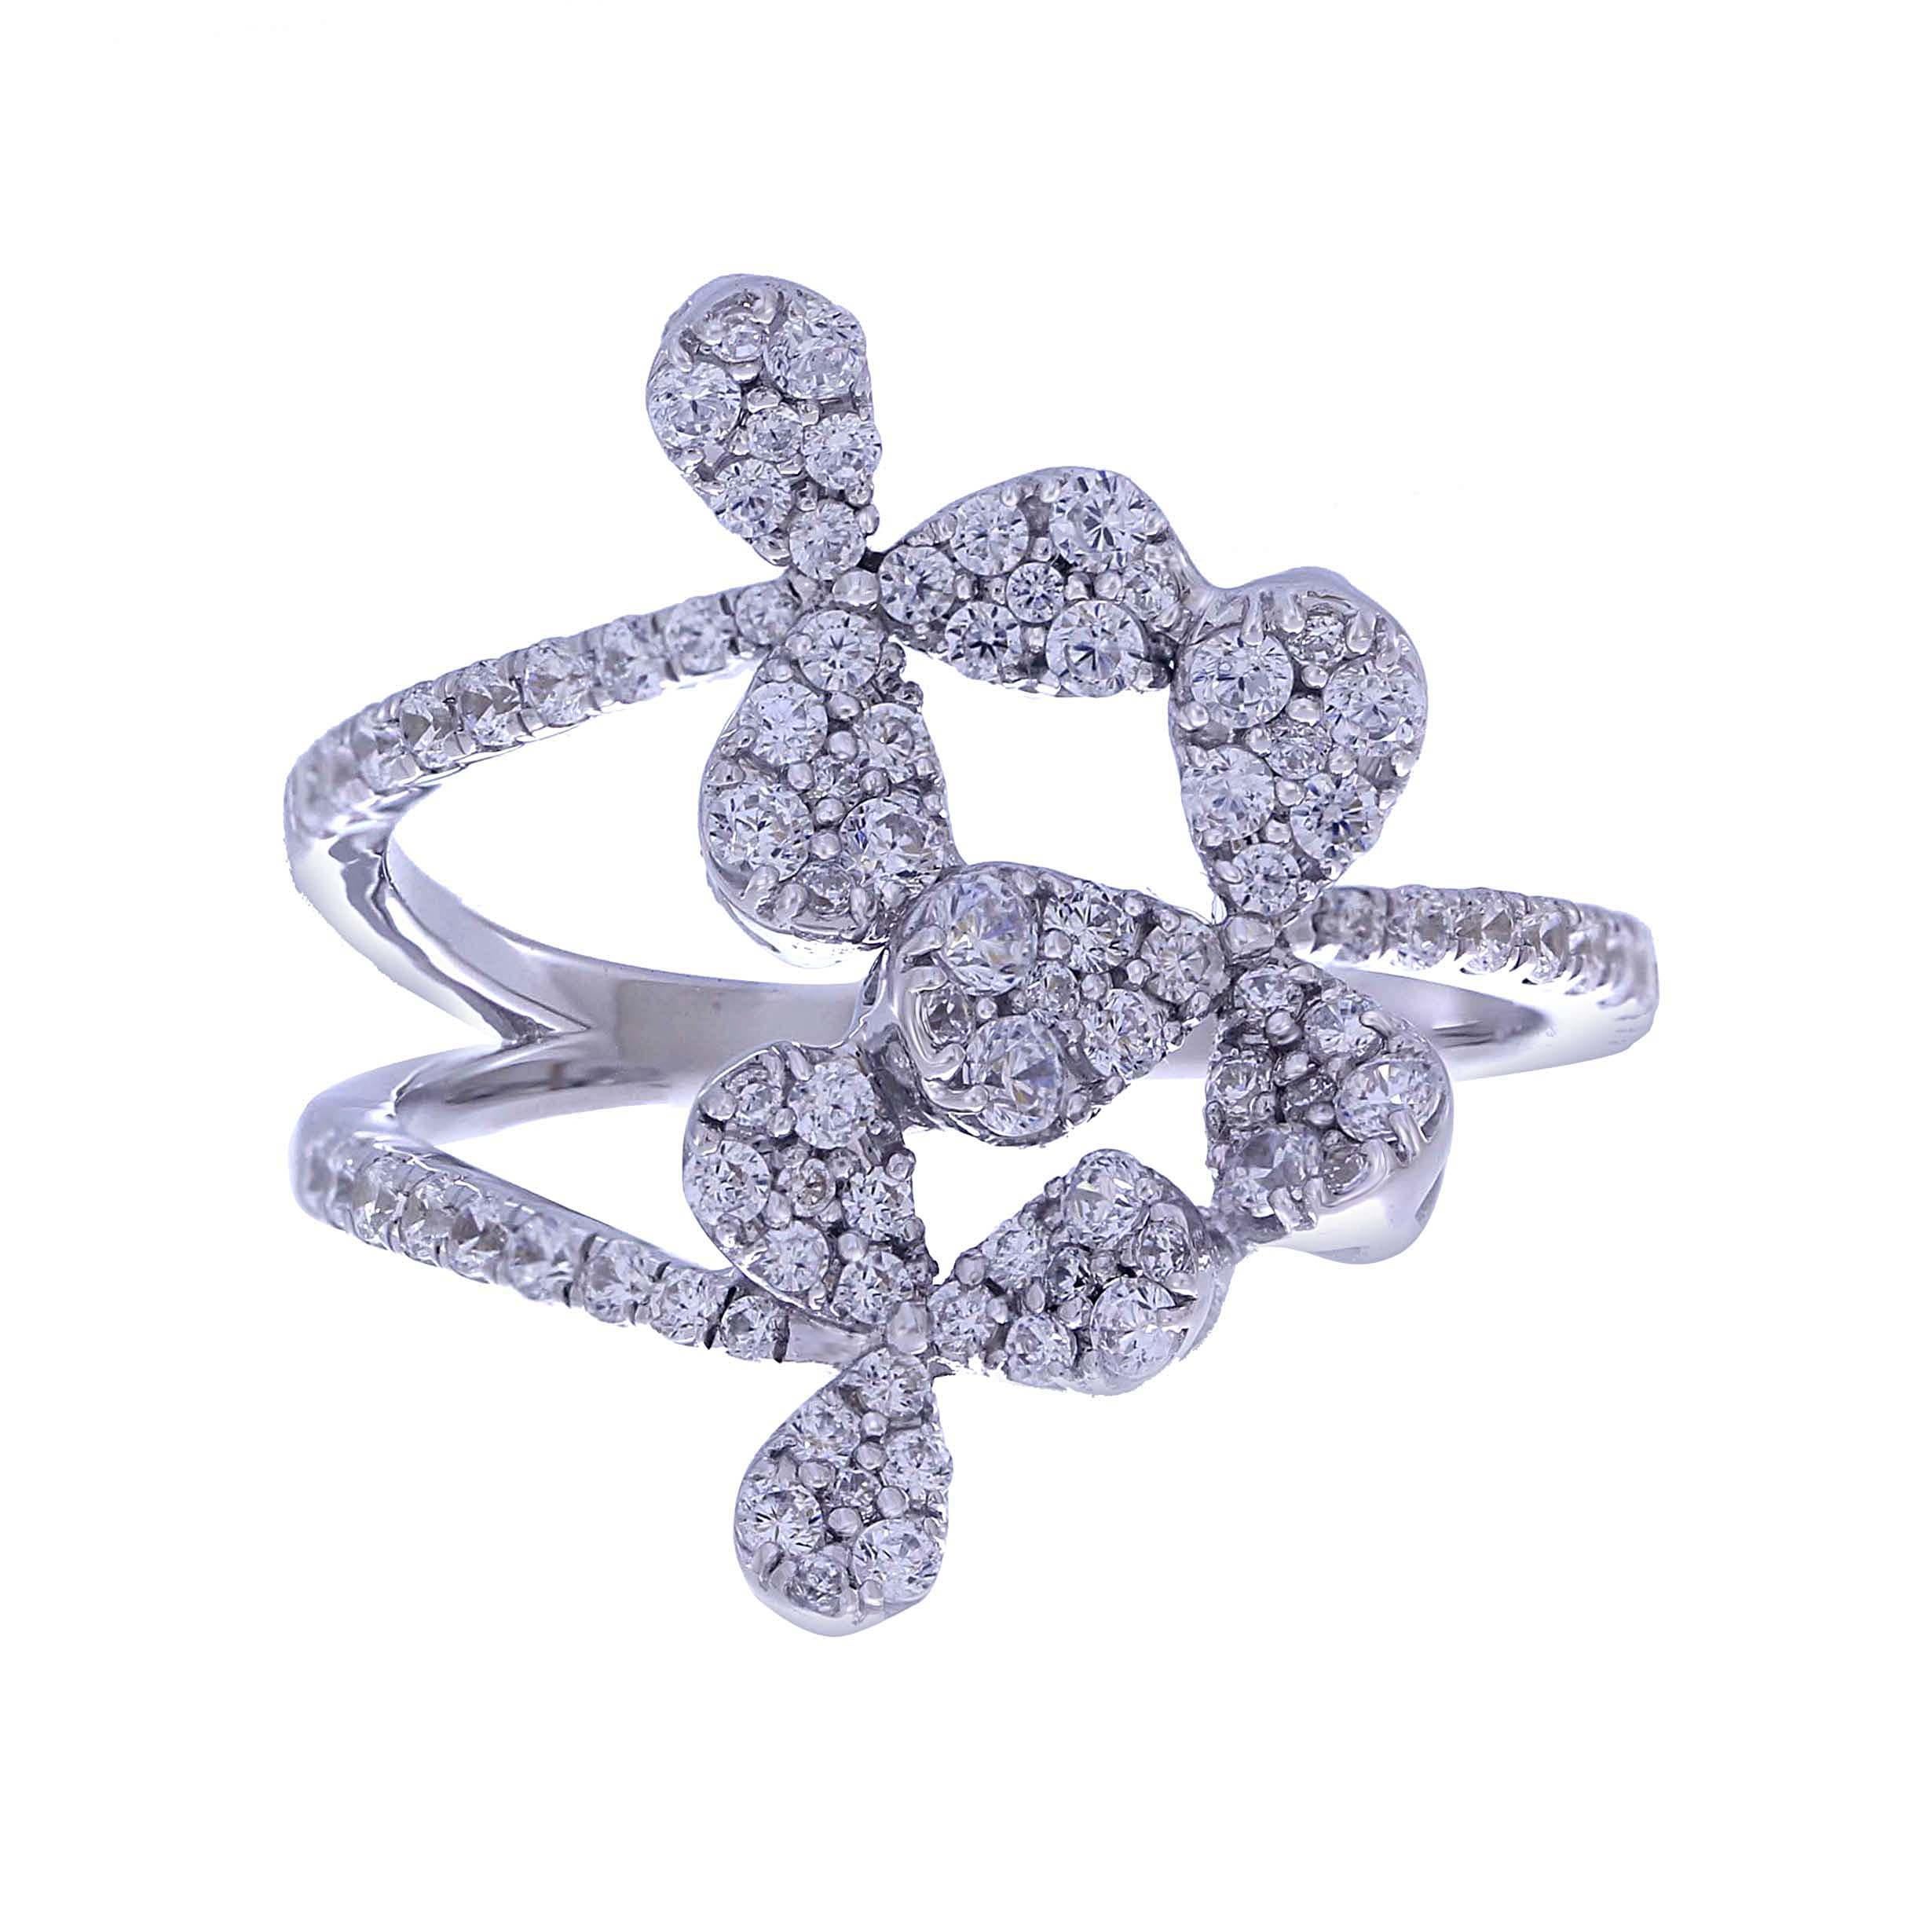 0.70 Carat White Diamond Pave Ring with 18 Karat White Gold Floral Design Ring

This modern ring features a total of 0.70 carats of diamonds round pave. The diamonds have SI clarity and F-G color, Set in 18K White gold.

The finger size is currently